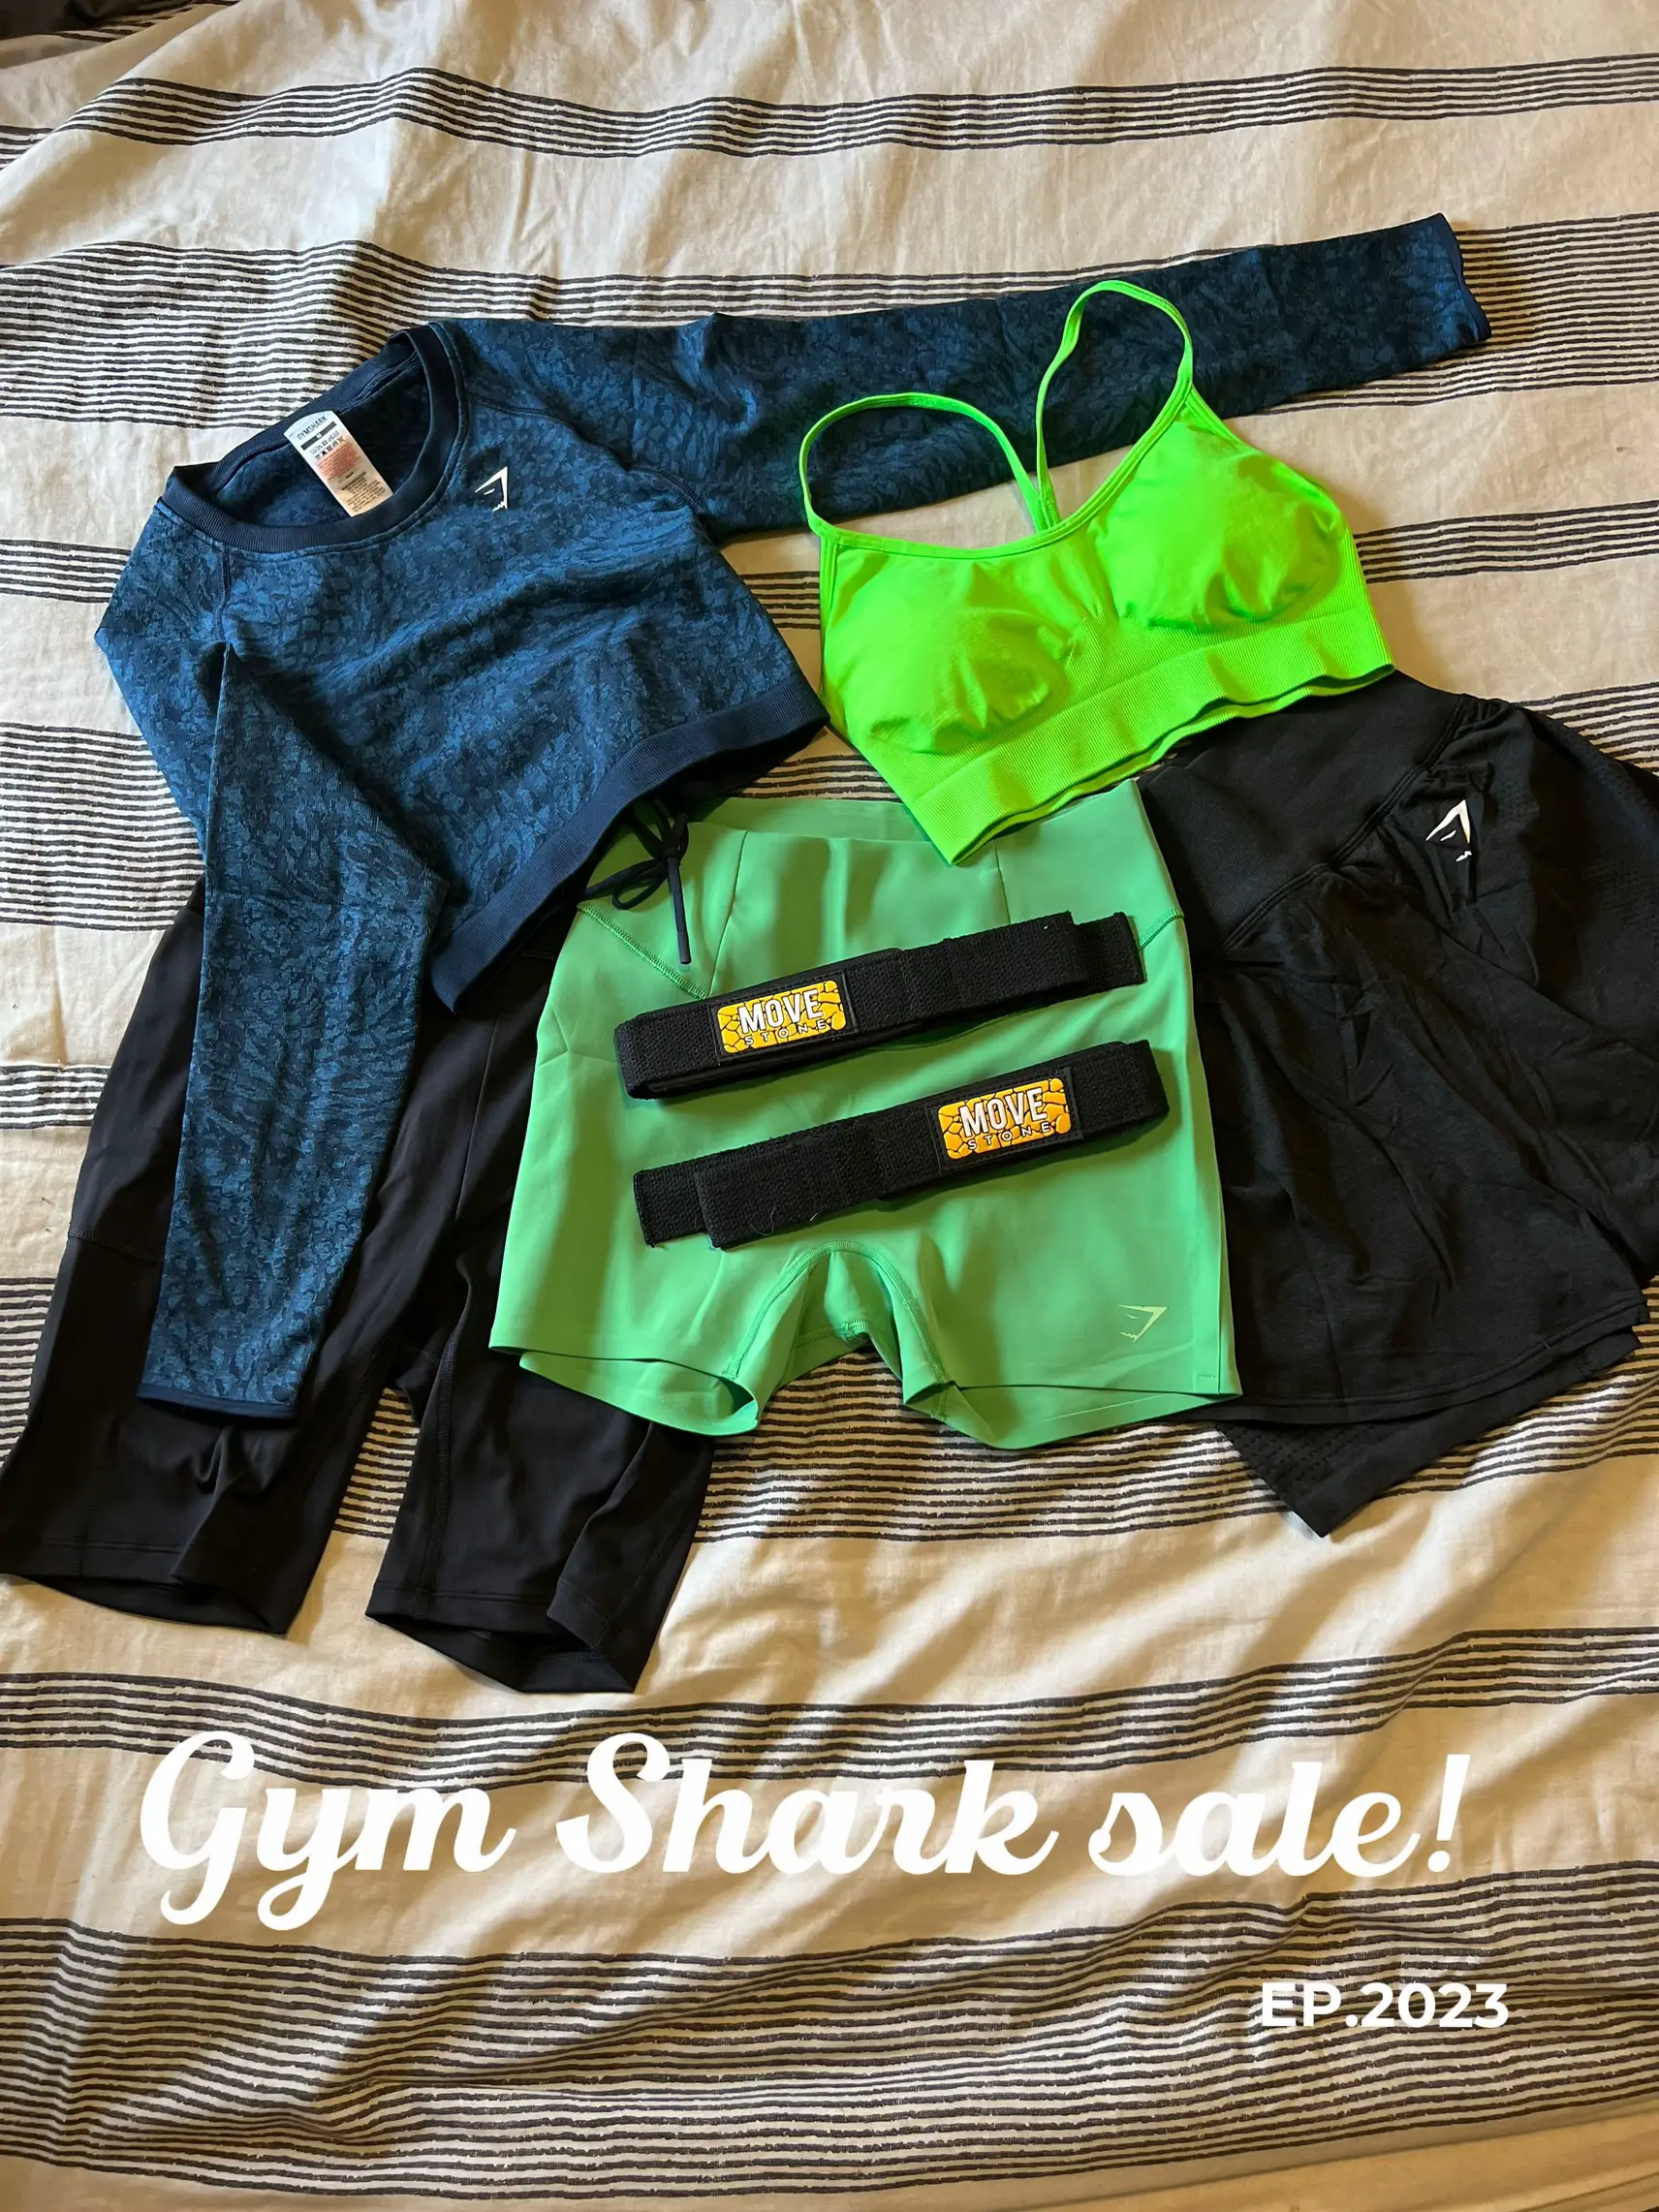 Gymshark Haul, Gallery posted by haileykep